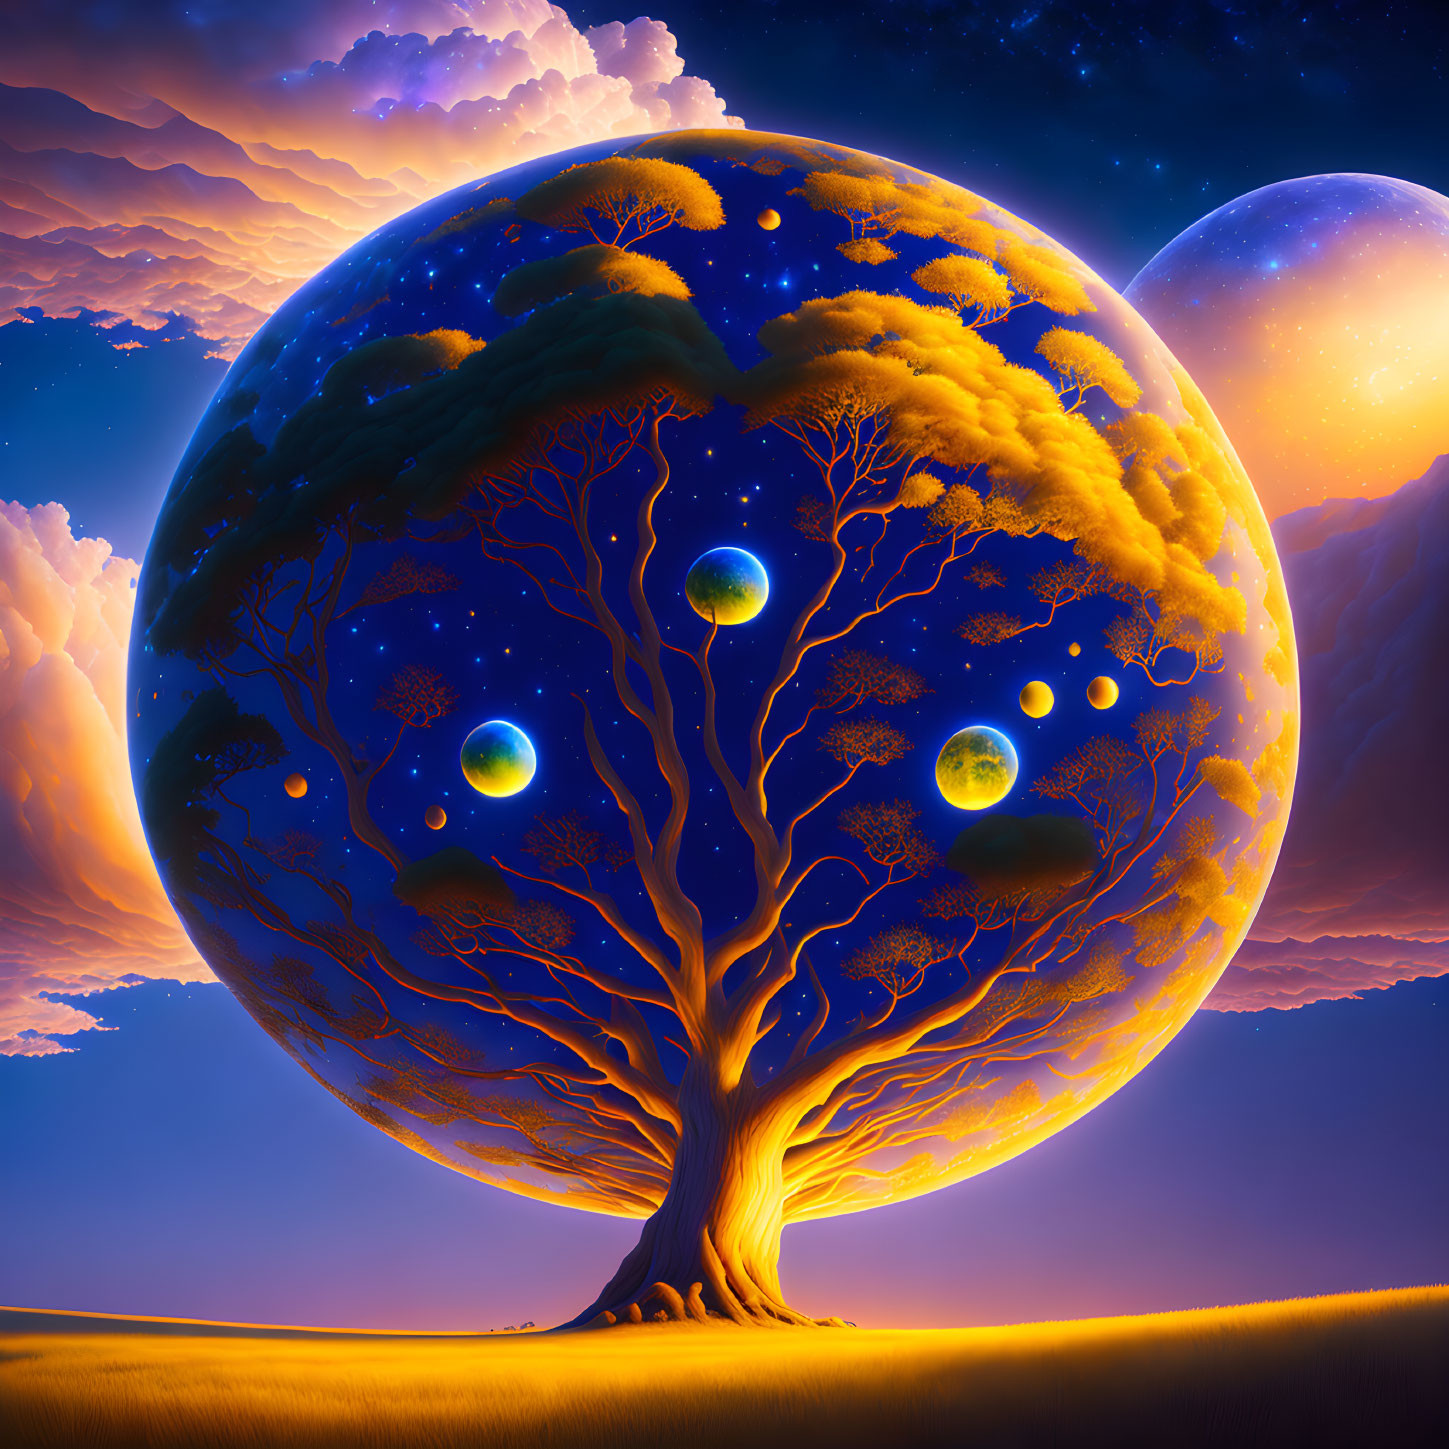 Surreal artwork: Colossal tree, glowing orbs, celestial bodies in twilight sky